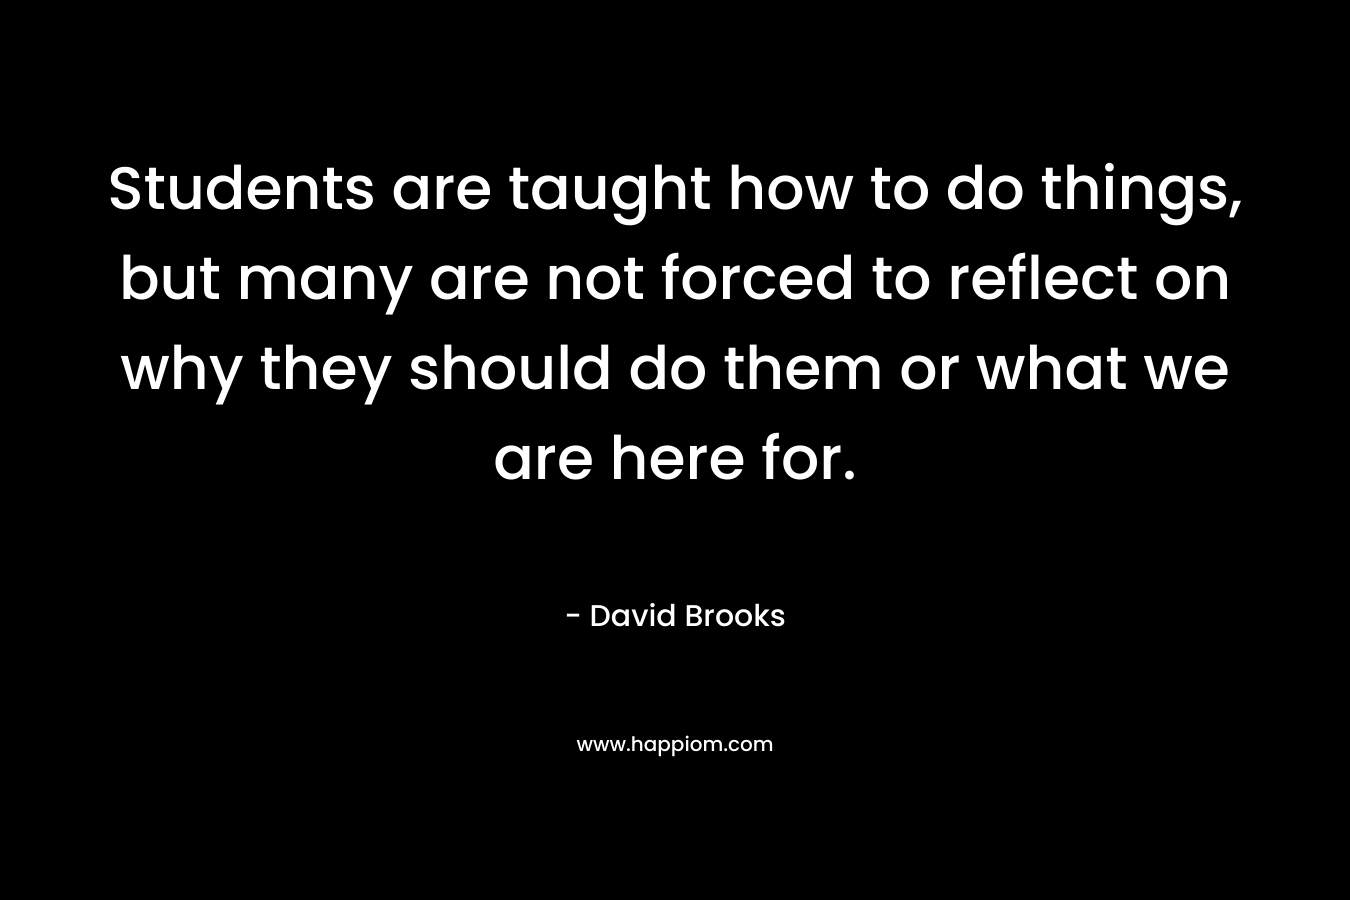 Students are taught how to do things, but many are not forced to reflect on why they should do them or what we are here for. – David Brooks